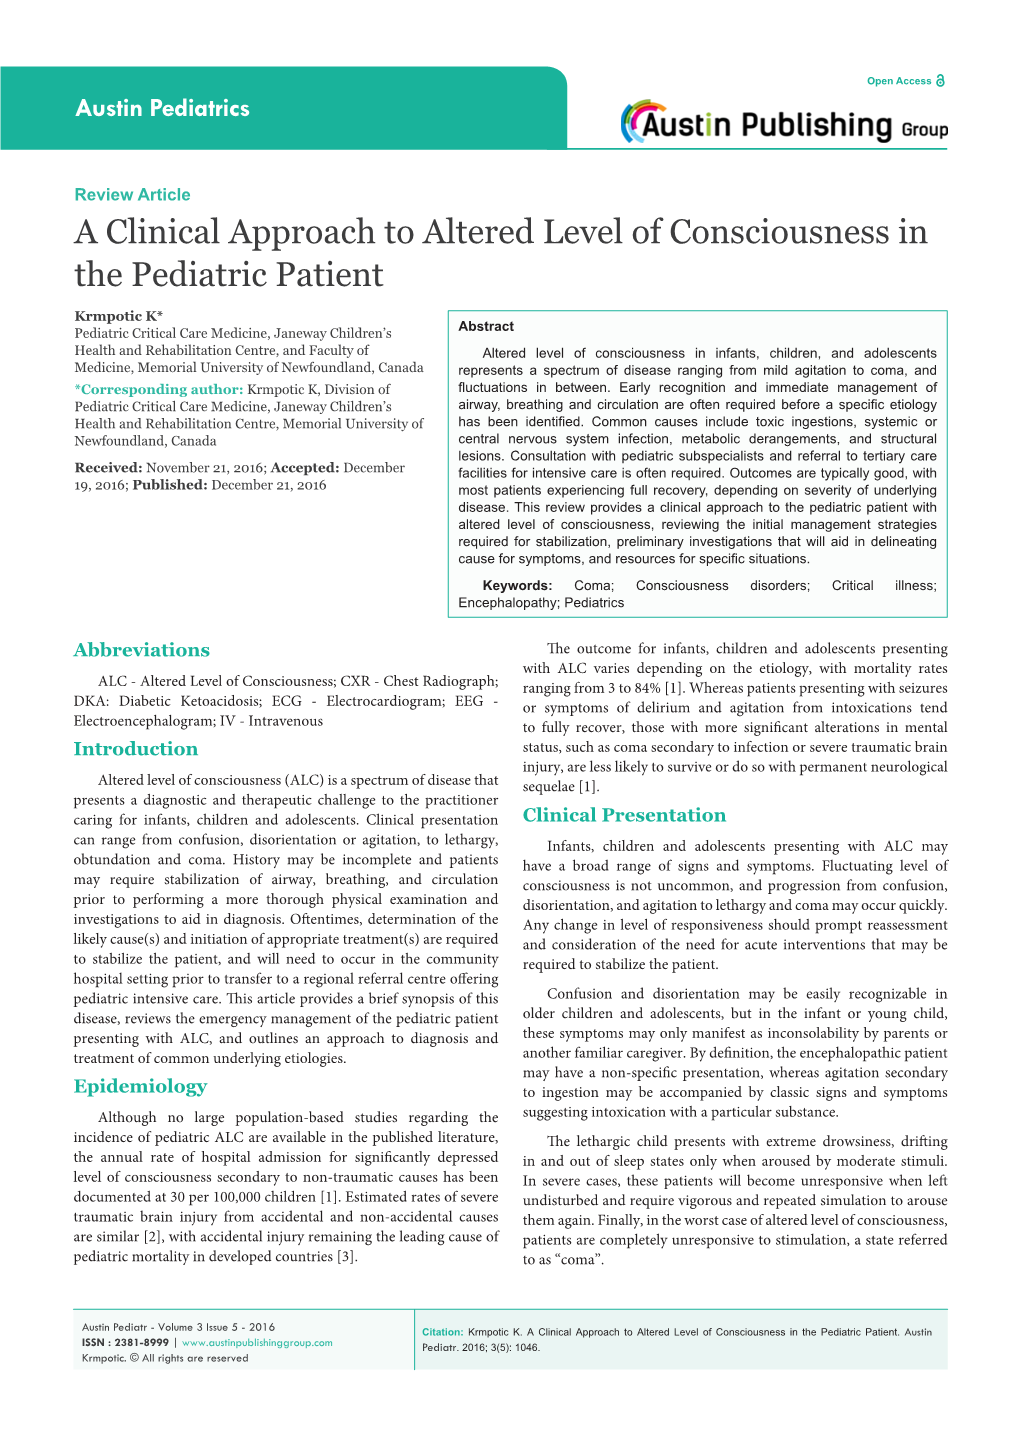 A Clinical Approach to Altered Level of Consciousness in the Pediatric Patient